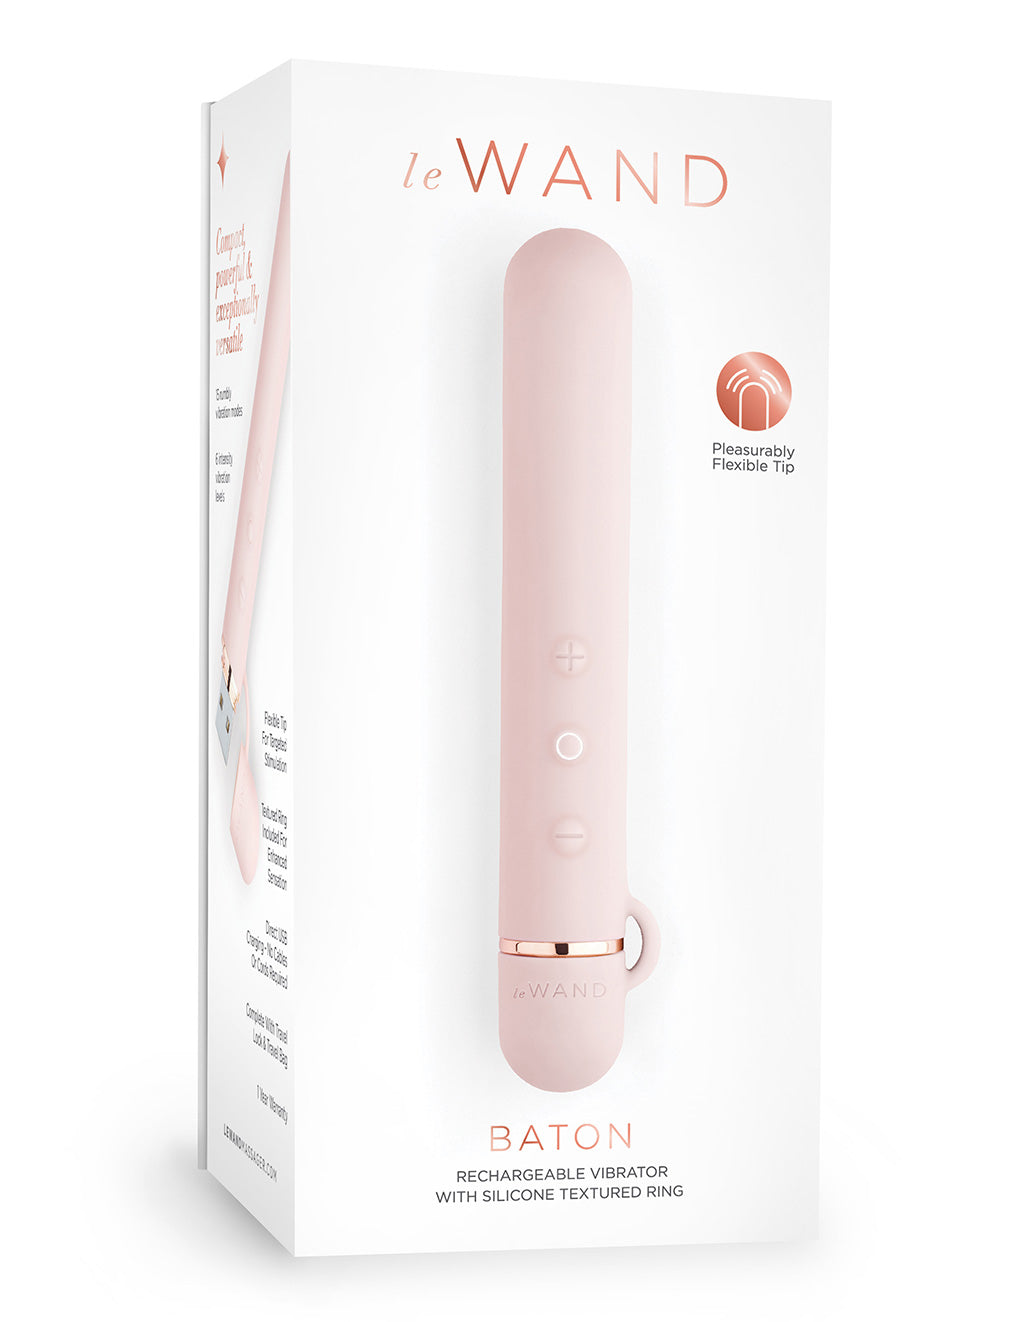 Le Wand Baton Rechargeable Clitoral Vibrator- Rose Gold- Box